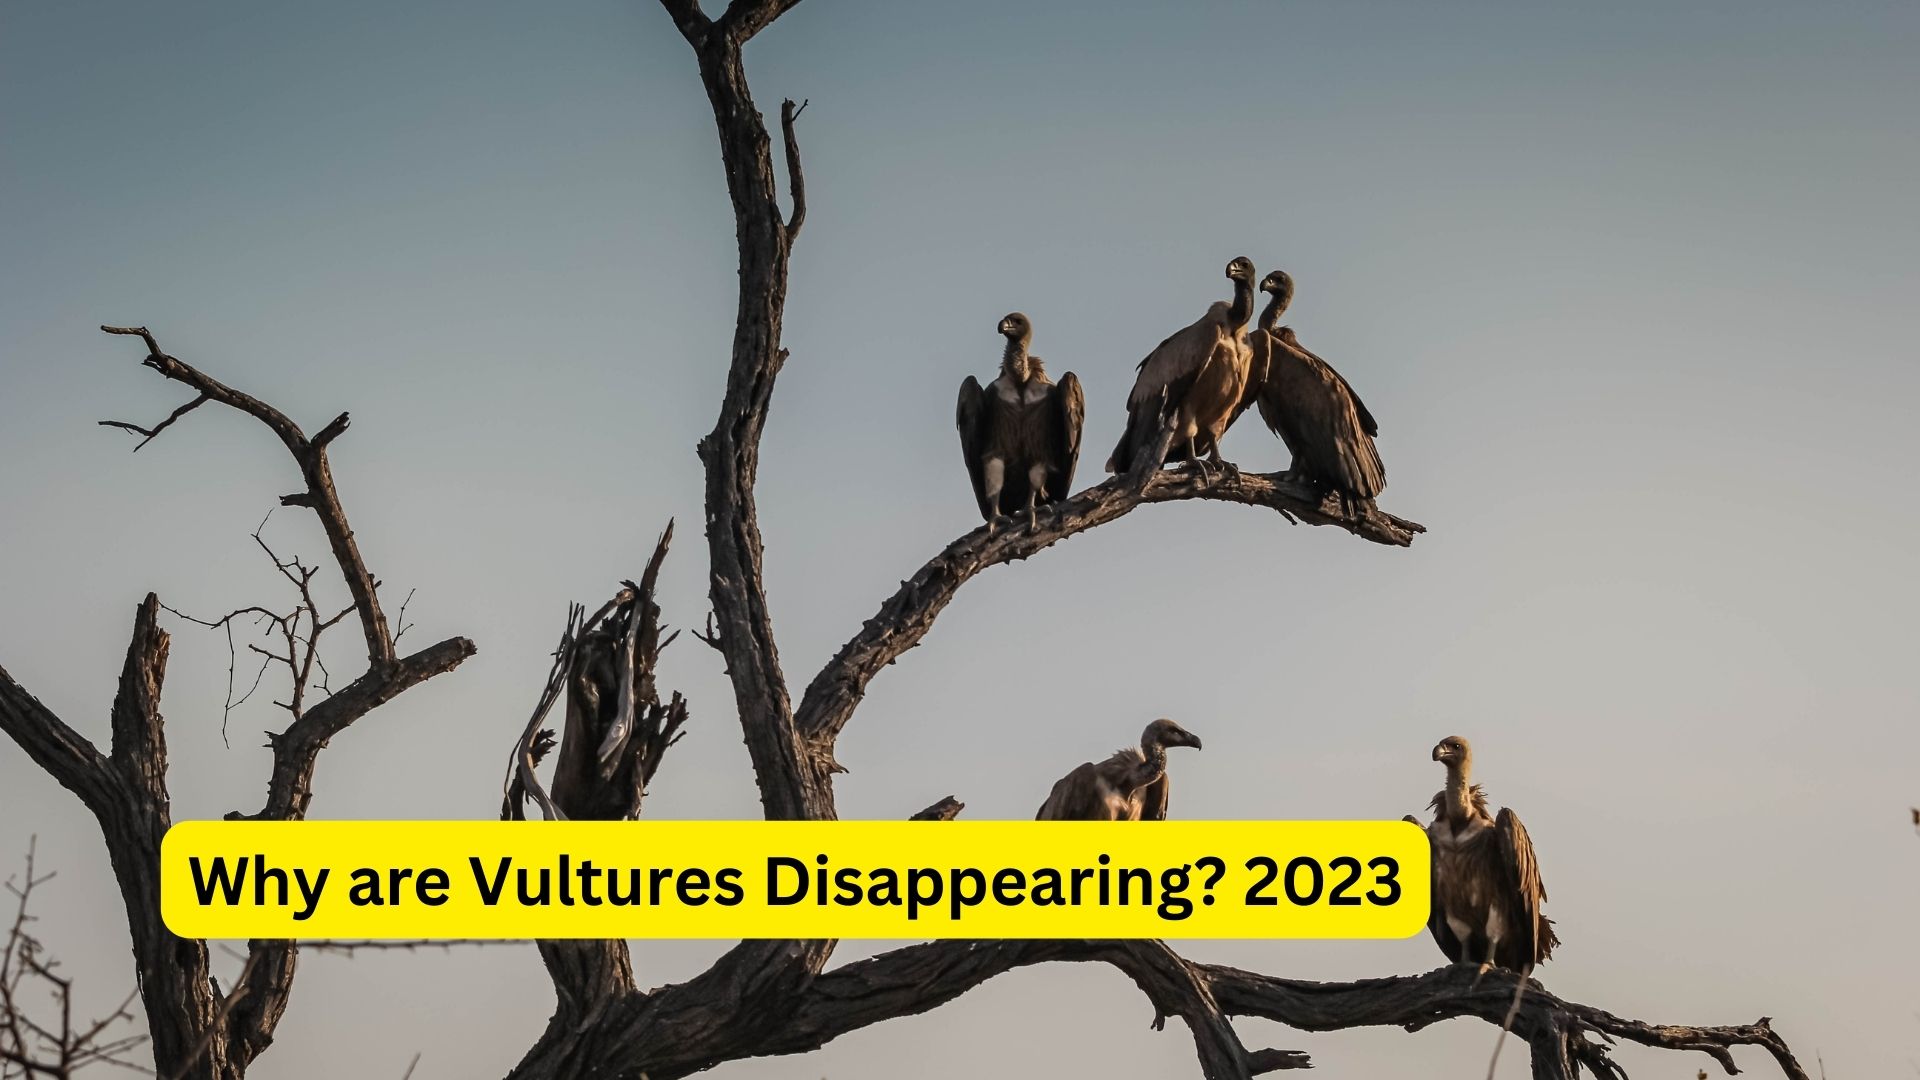 Why are Vultures Disappearing? 2023